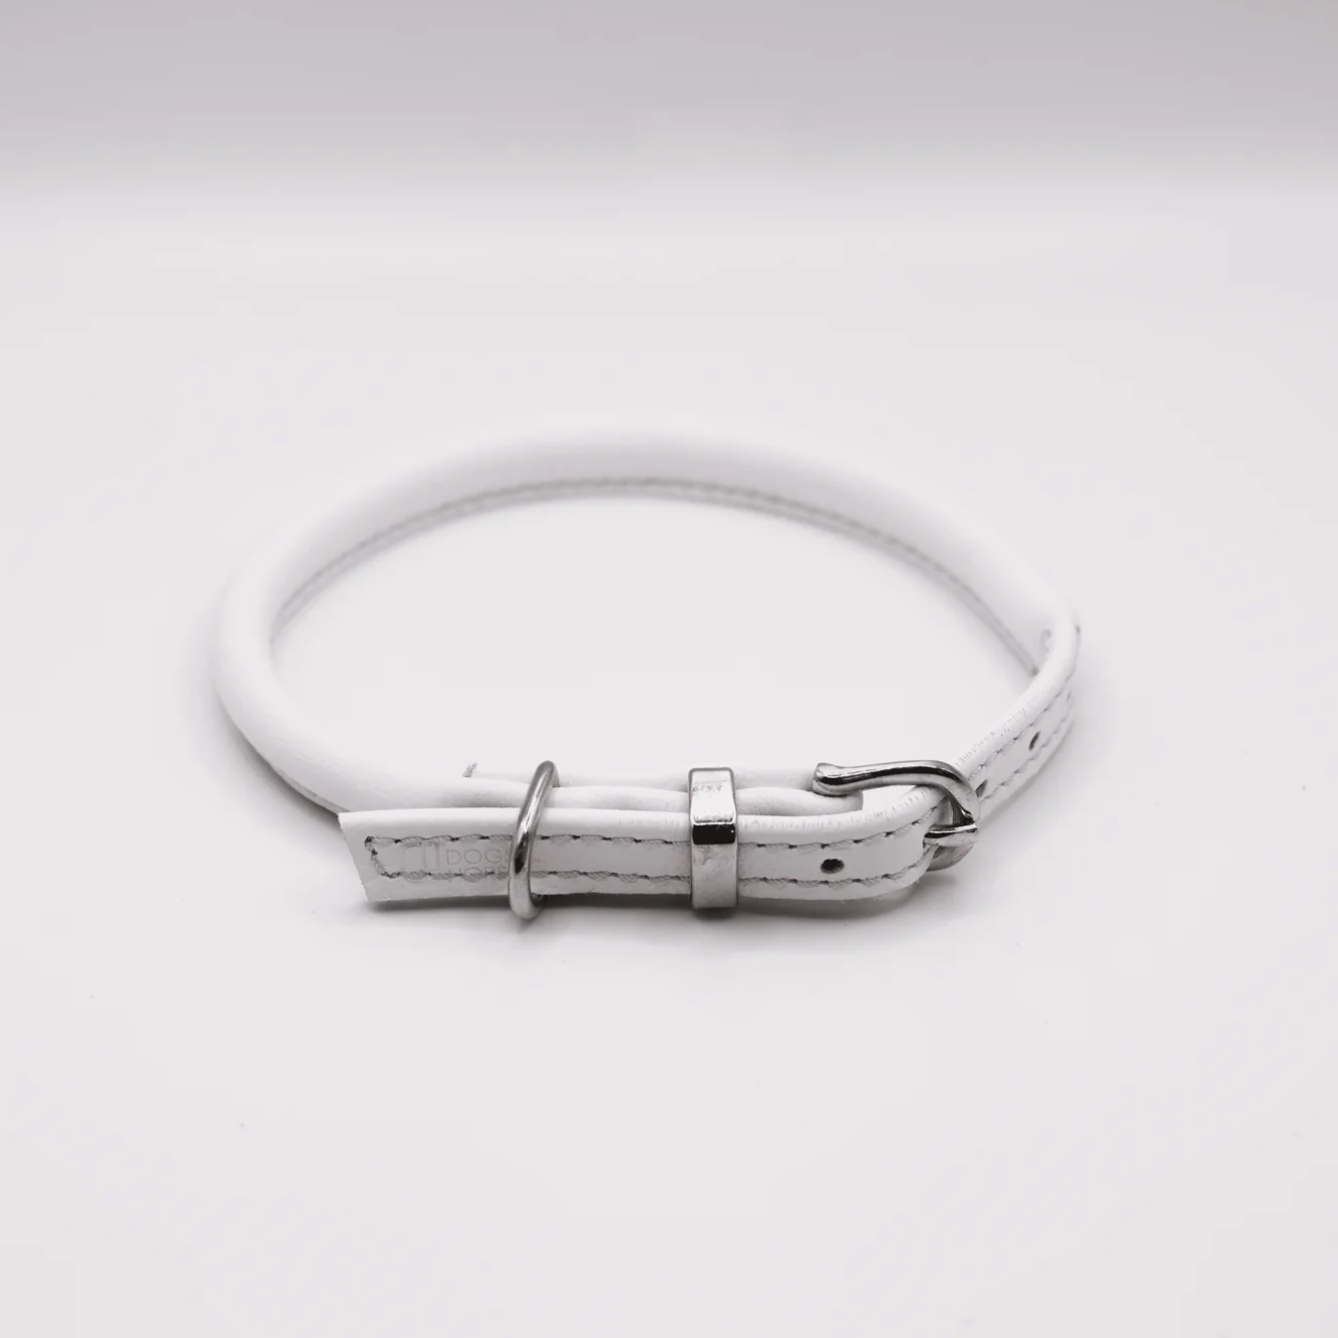 Rolled Soft Leather Dog Collar White